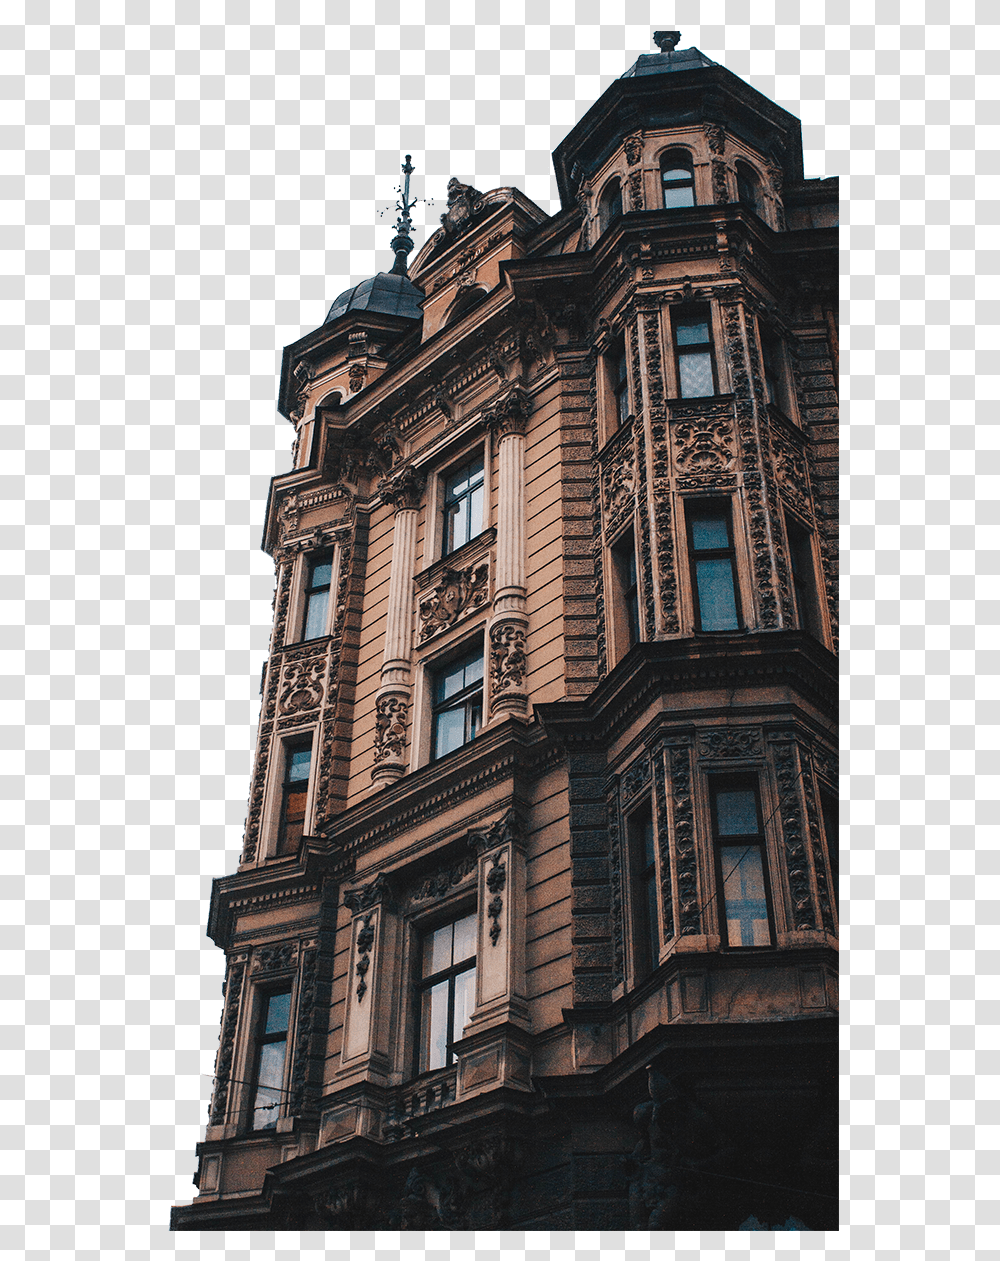 Architecture Building And House Image Building Overlay, Corner, High Rise, City, Urban Transparent Png